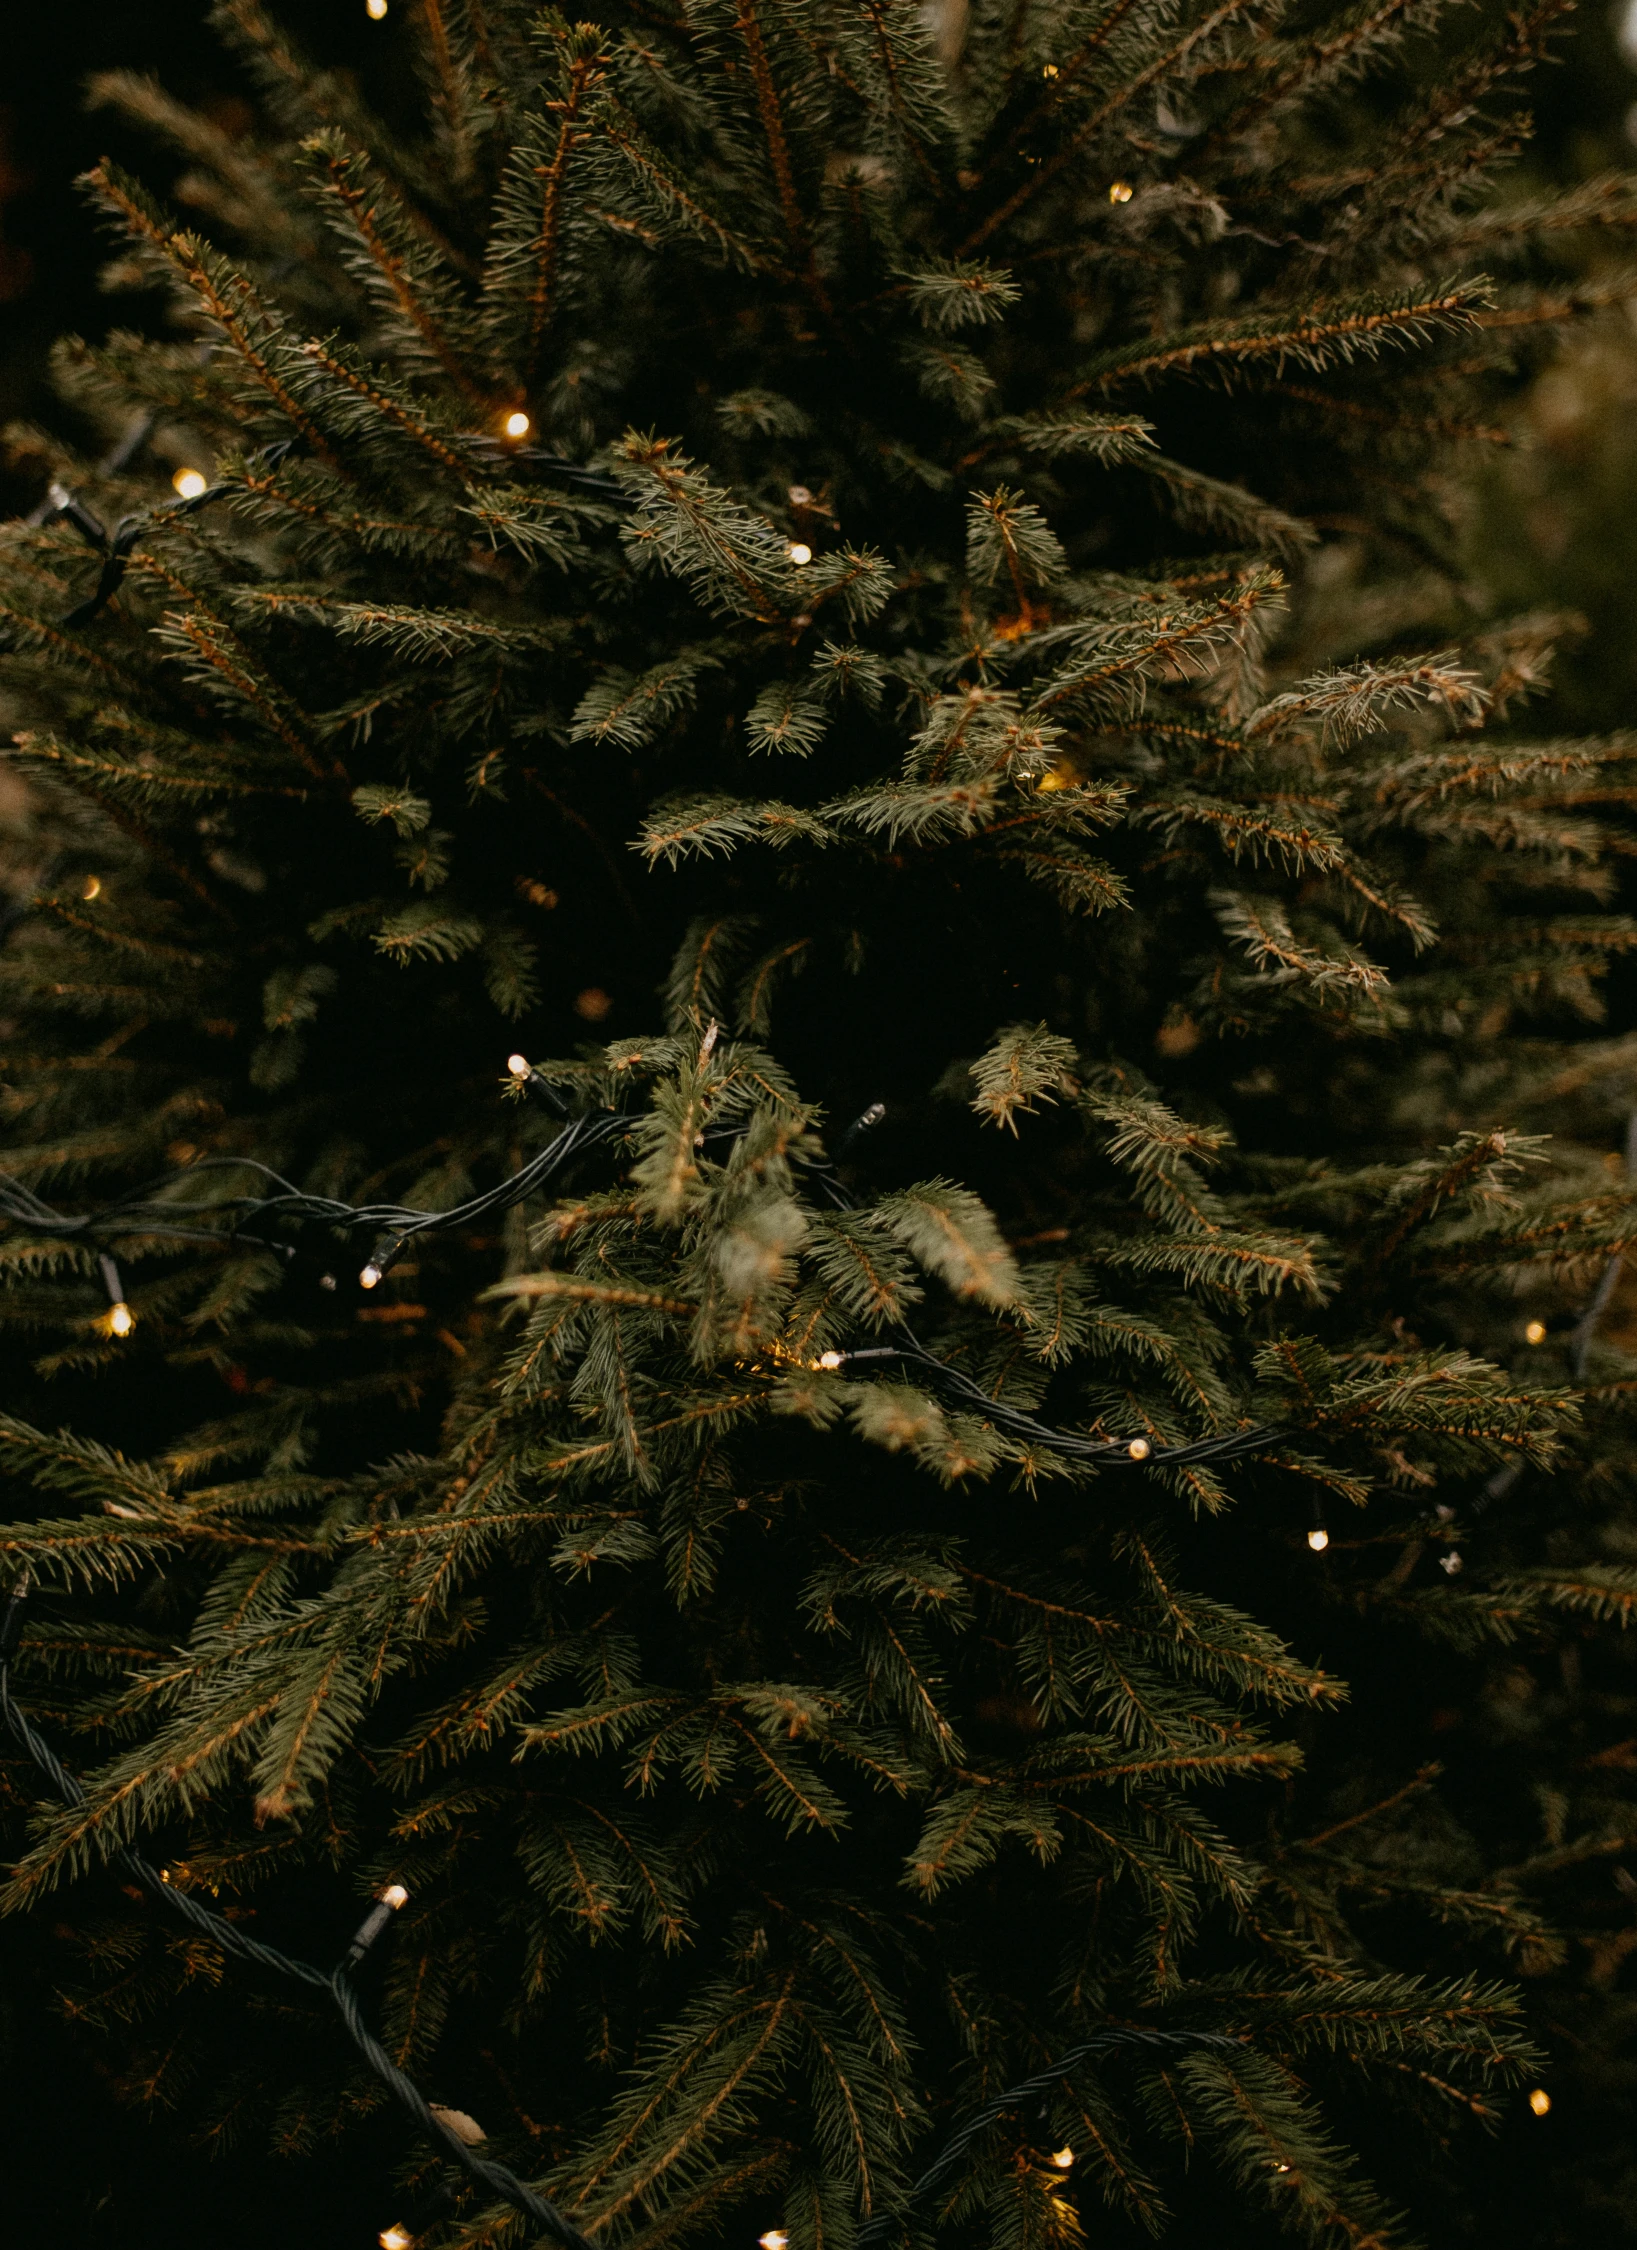 a close up of a tree with lights